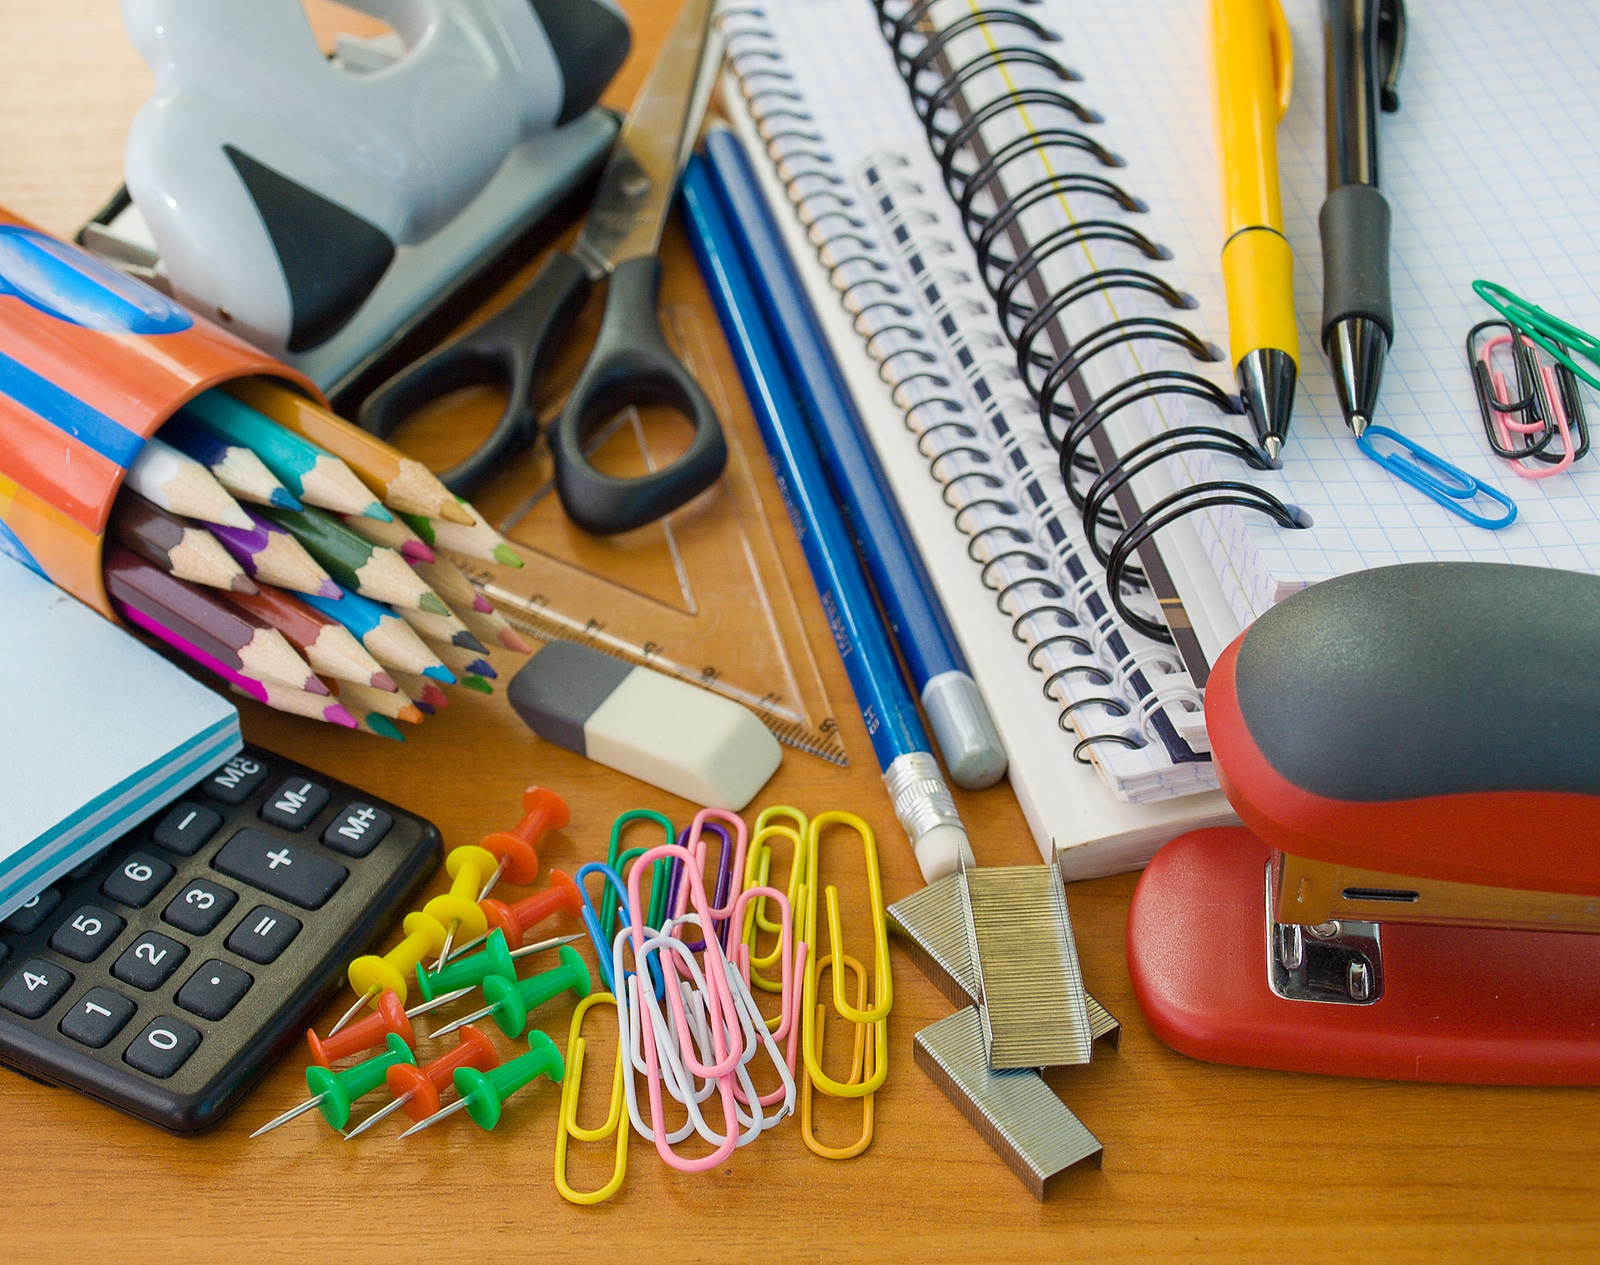 Essential Office Supplies for your Small Business or Home Based Business: The 20 Core Items